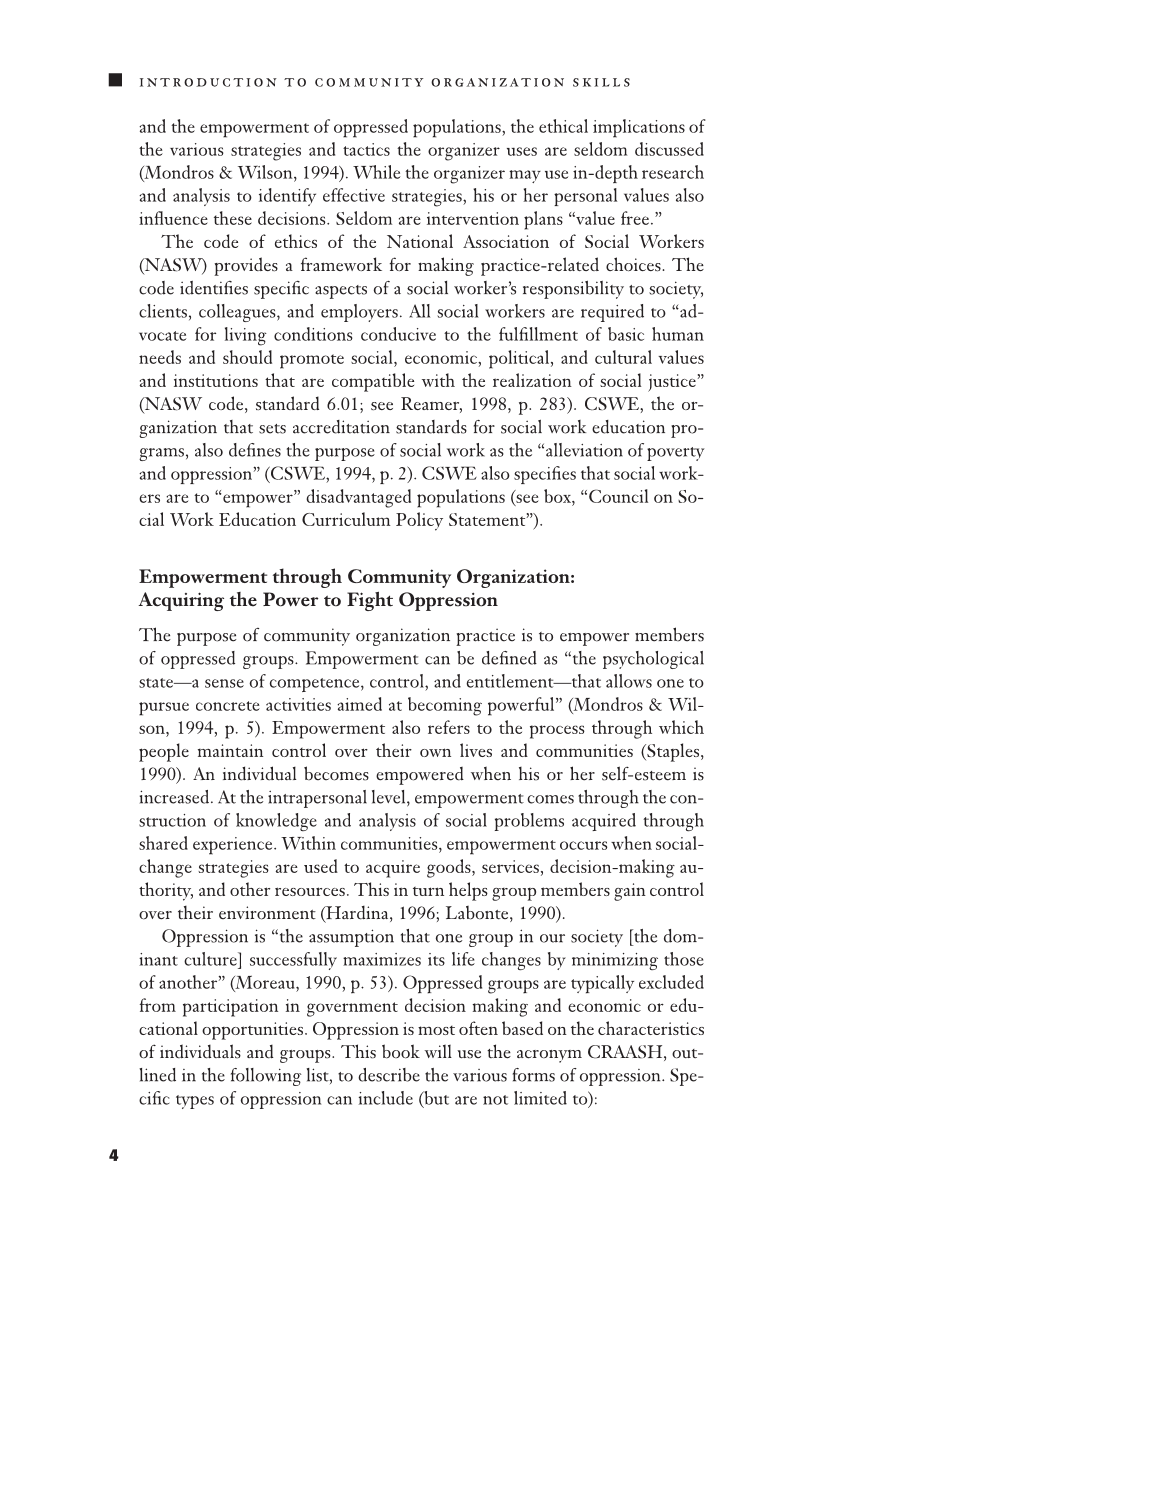 Analytical Skills for Community Organization Practice page 4